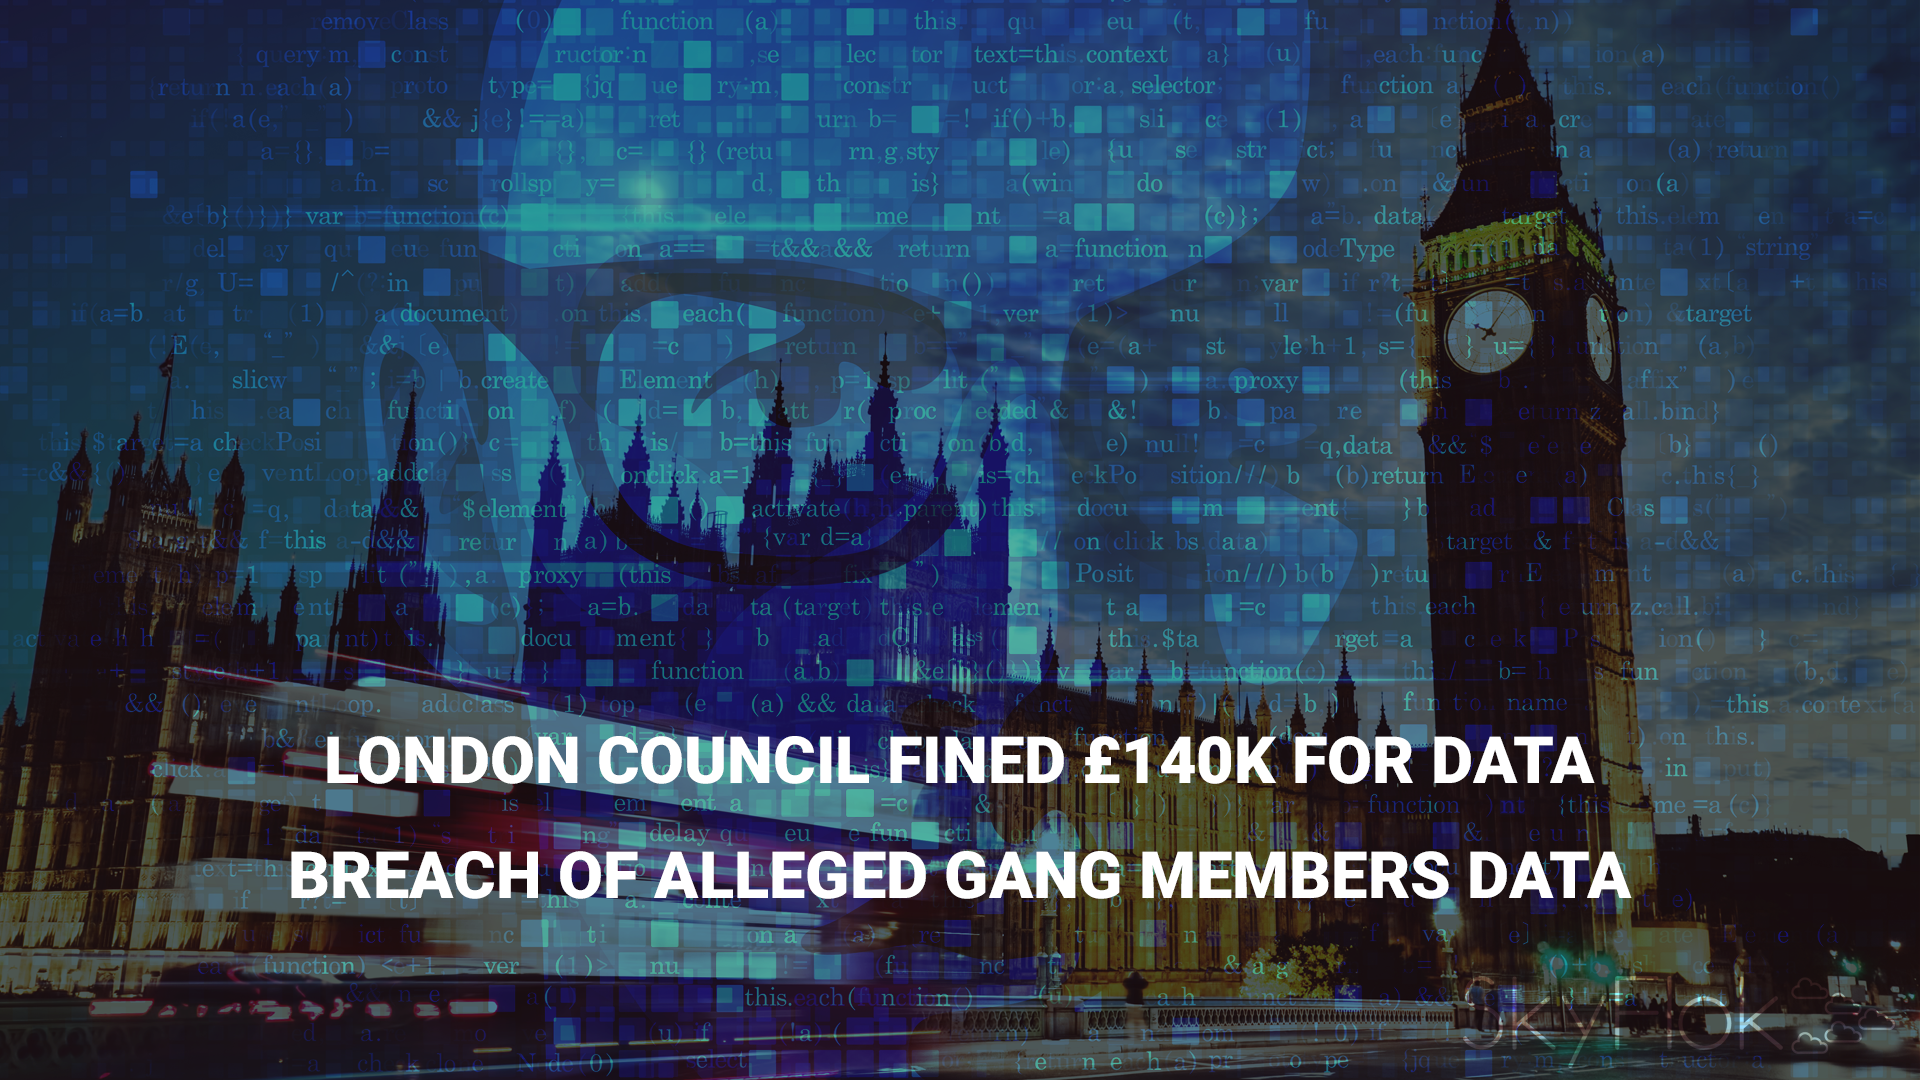 London council fined £140k for data breach of alleged gang members data